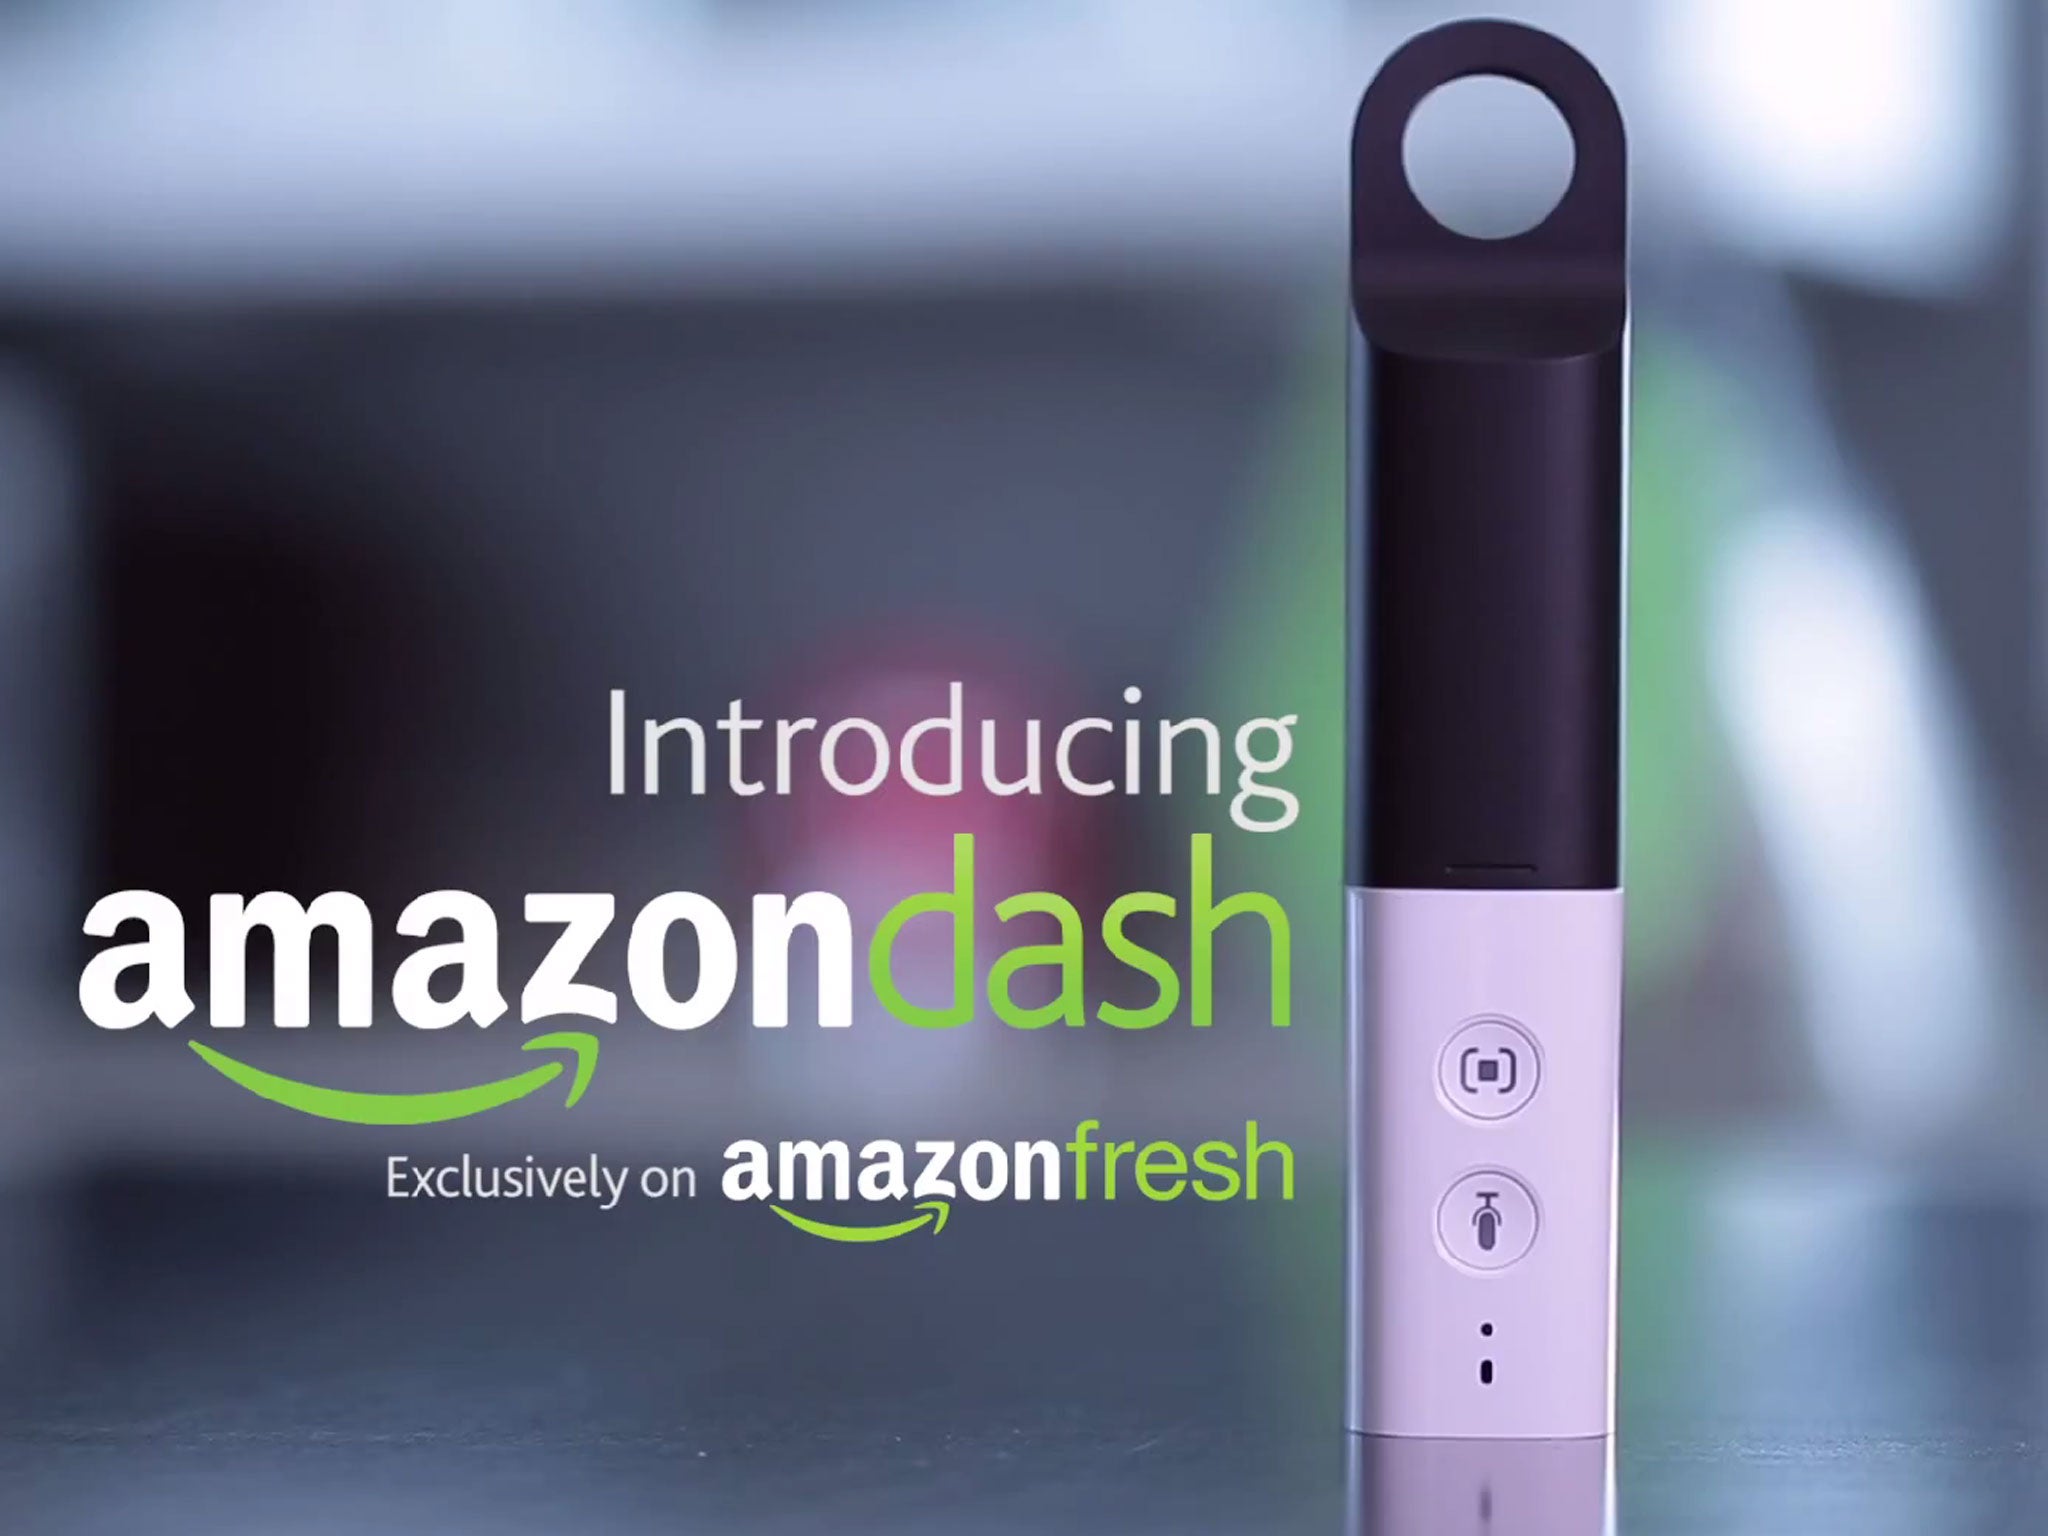 The Amazon Dash. It connects to a home's Wi-Fi connection to add items to a shopping list via voice input or barcode scanner.